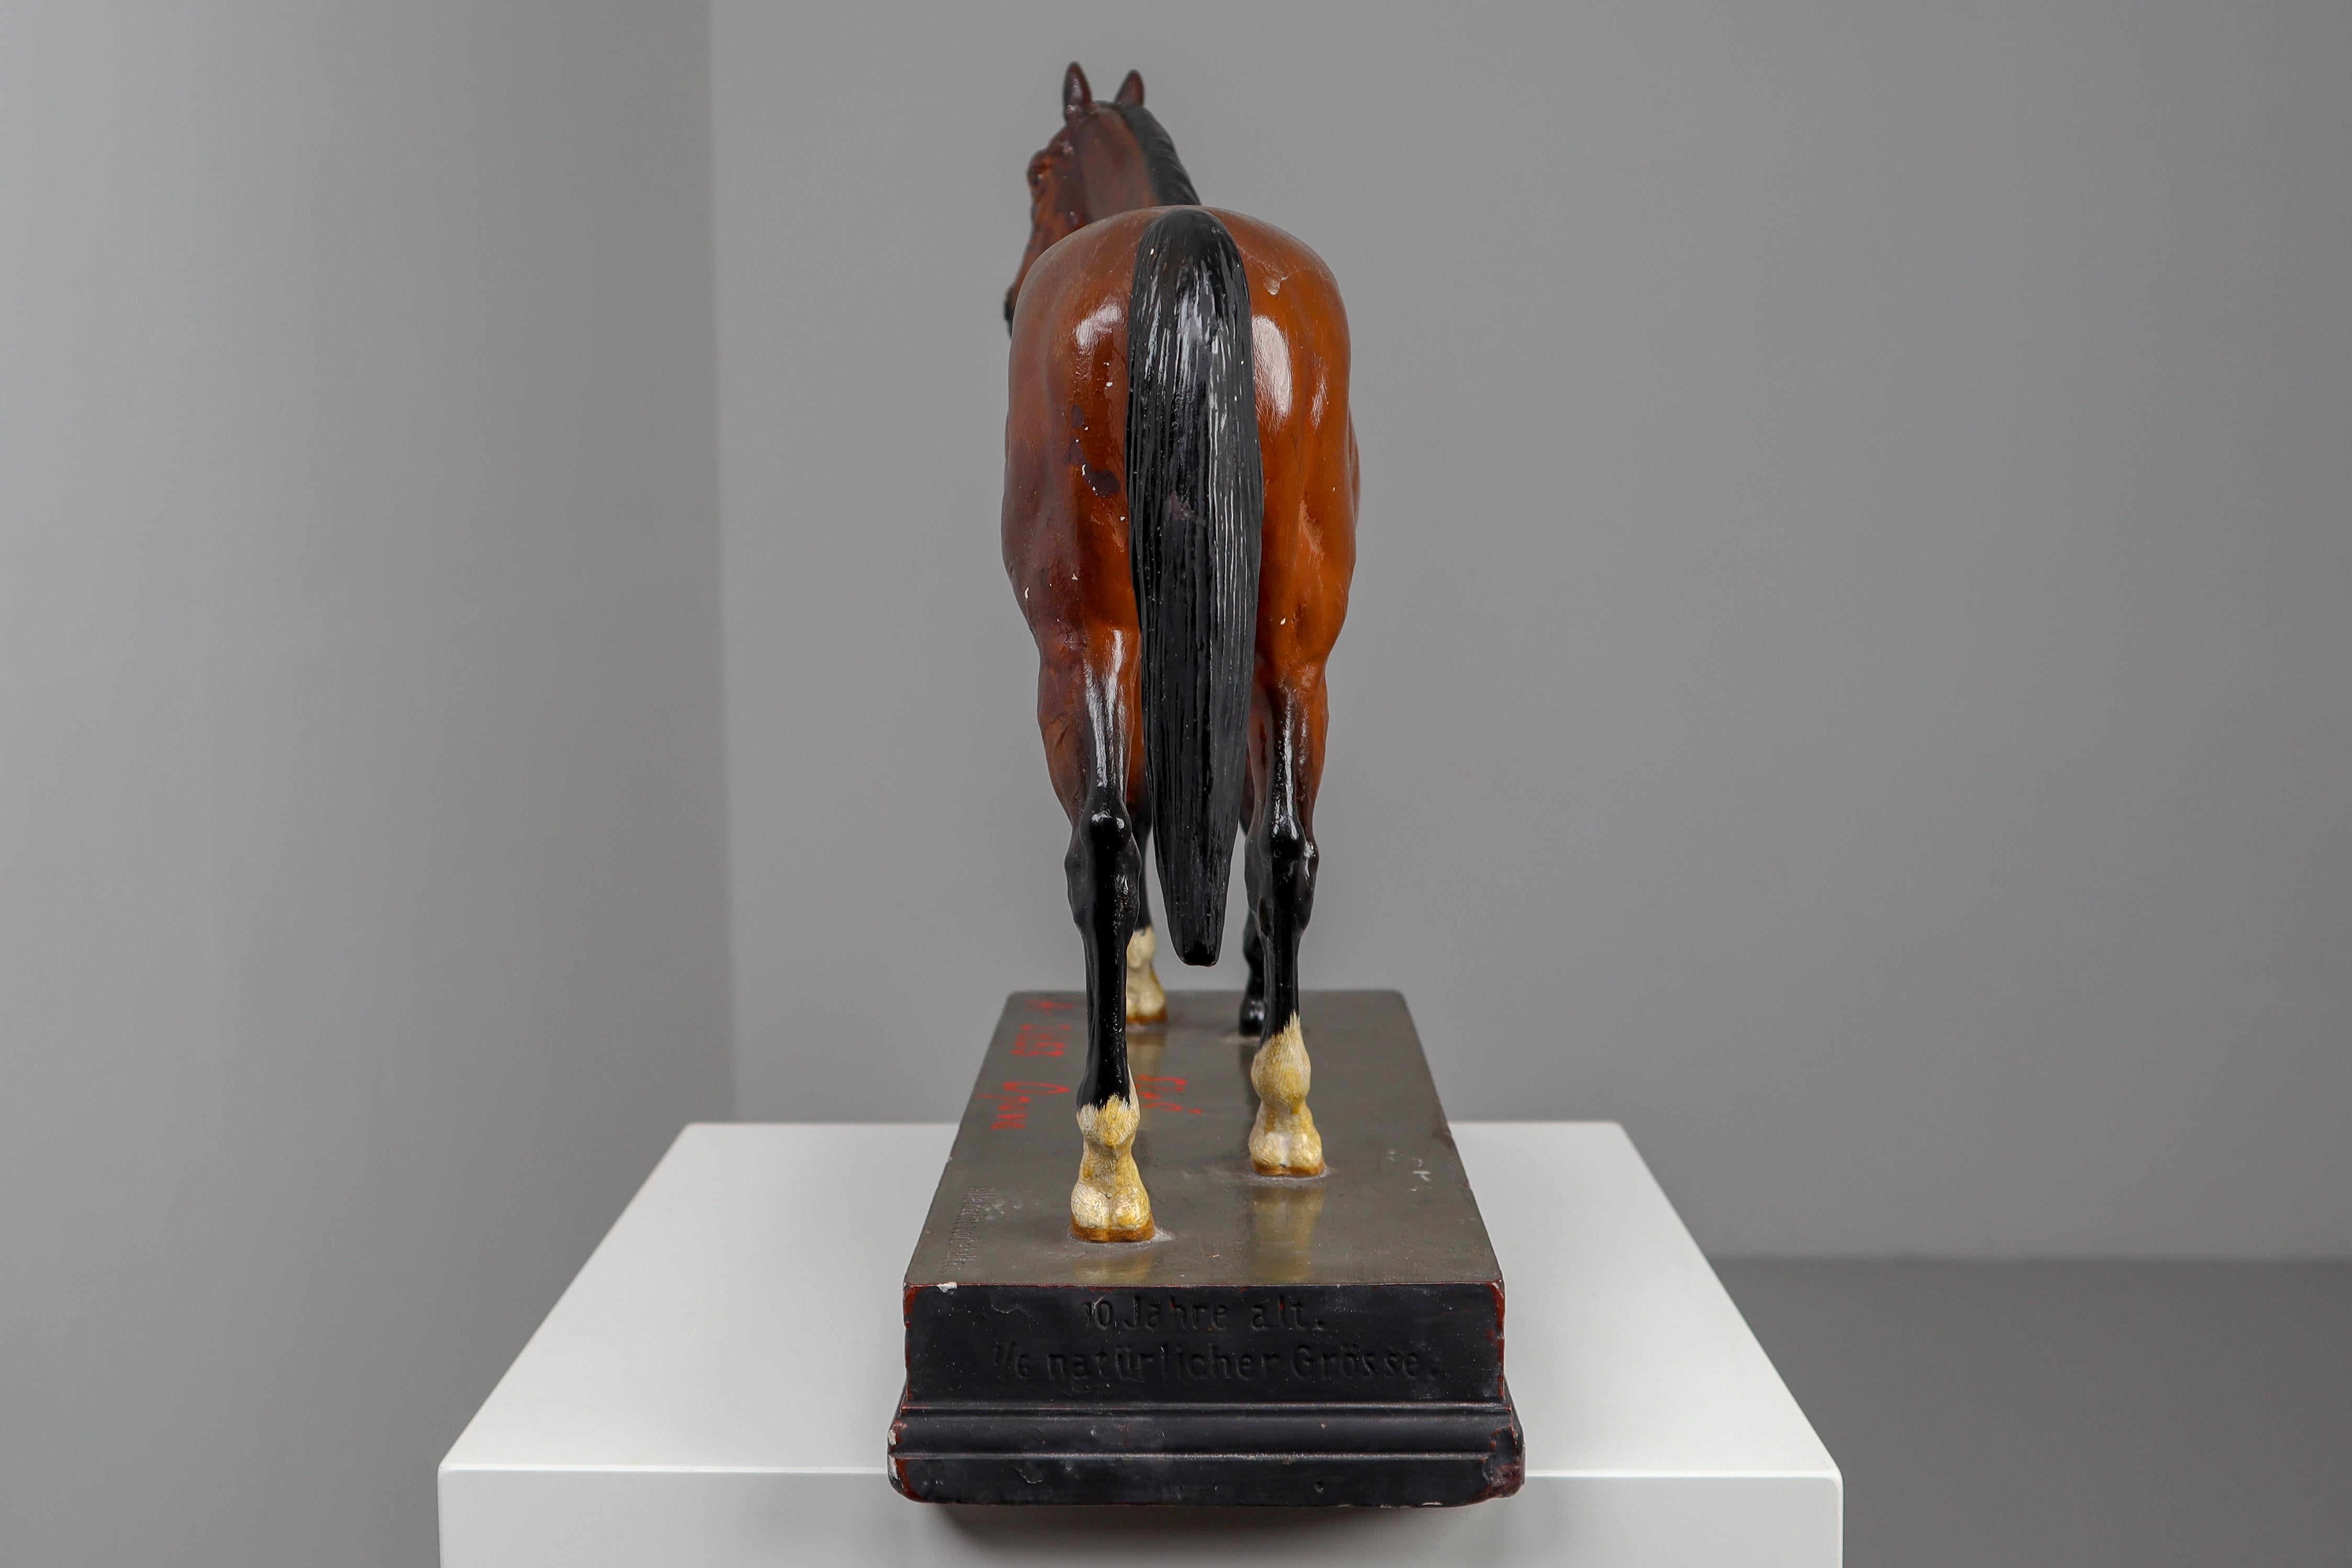 19th Century Thoroughbred Mare Horse Model in Painted Plaster by Max Landsberg, Berlin, 1891